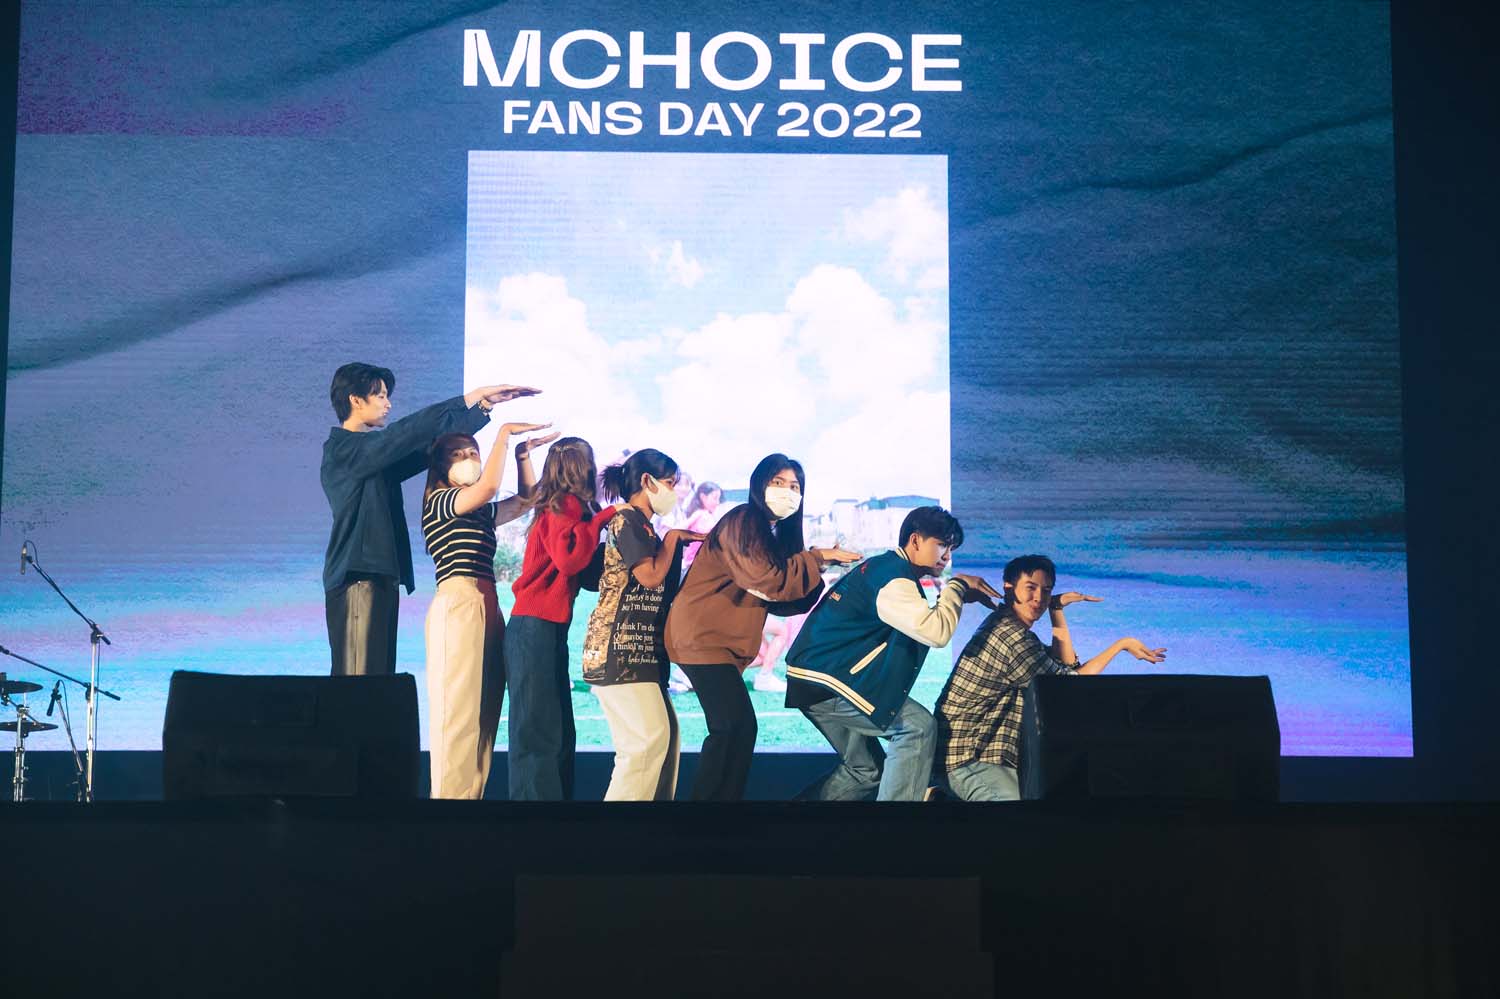 mchoice fans day 2022